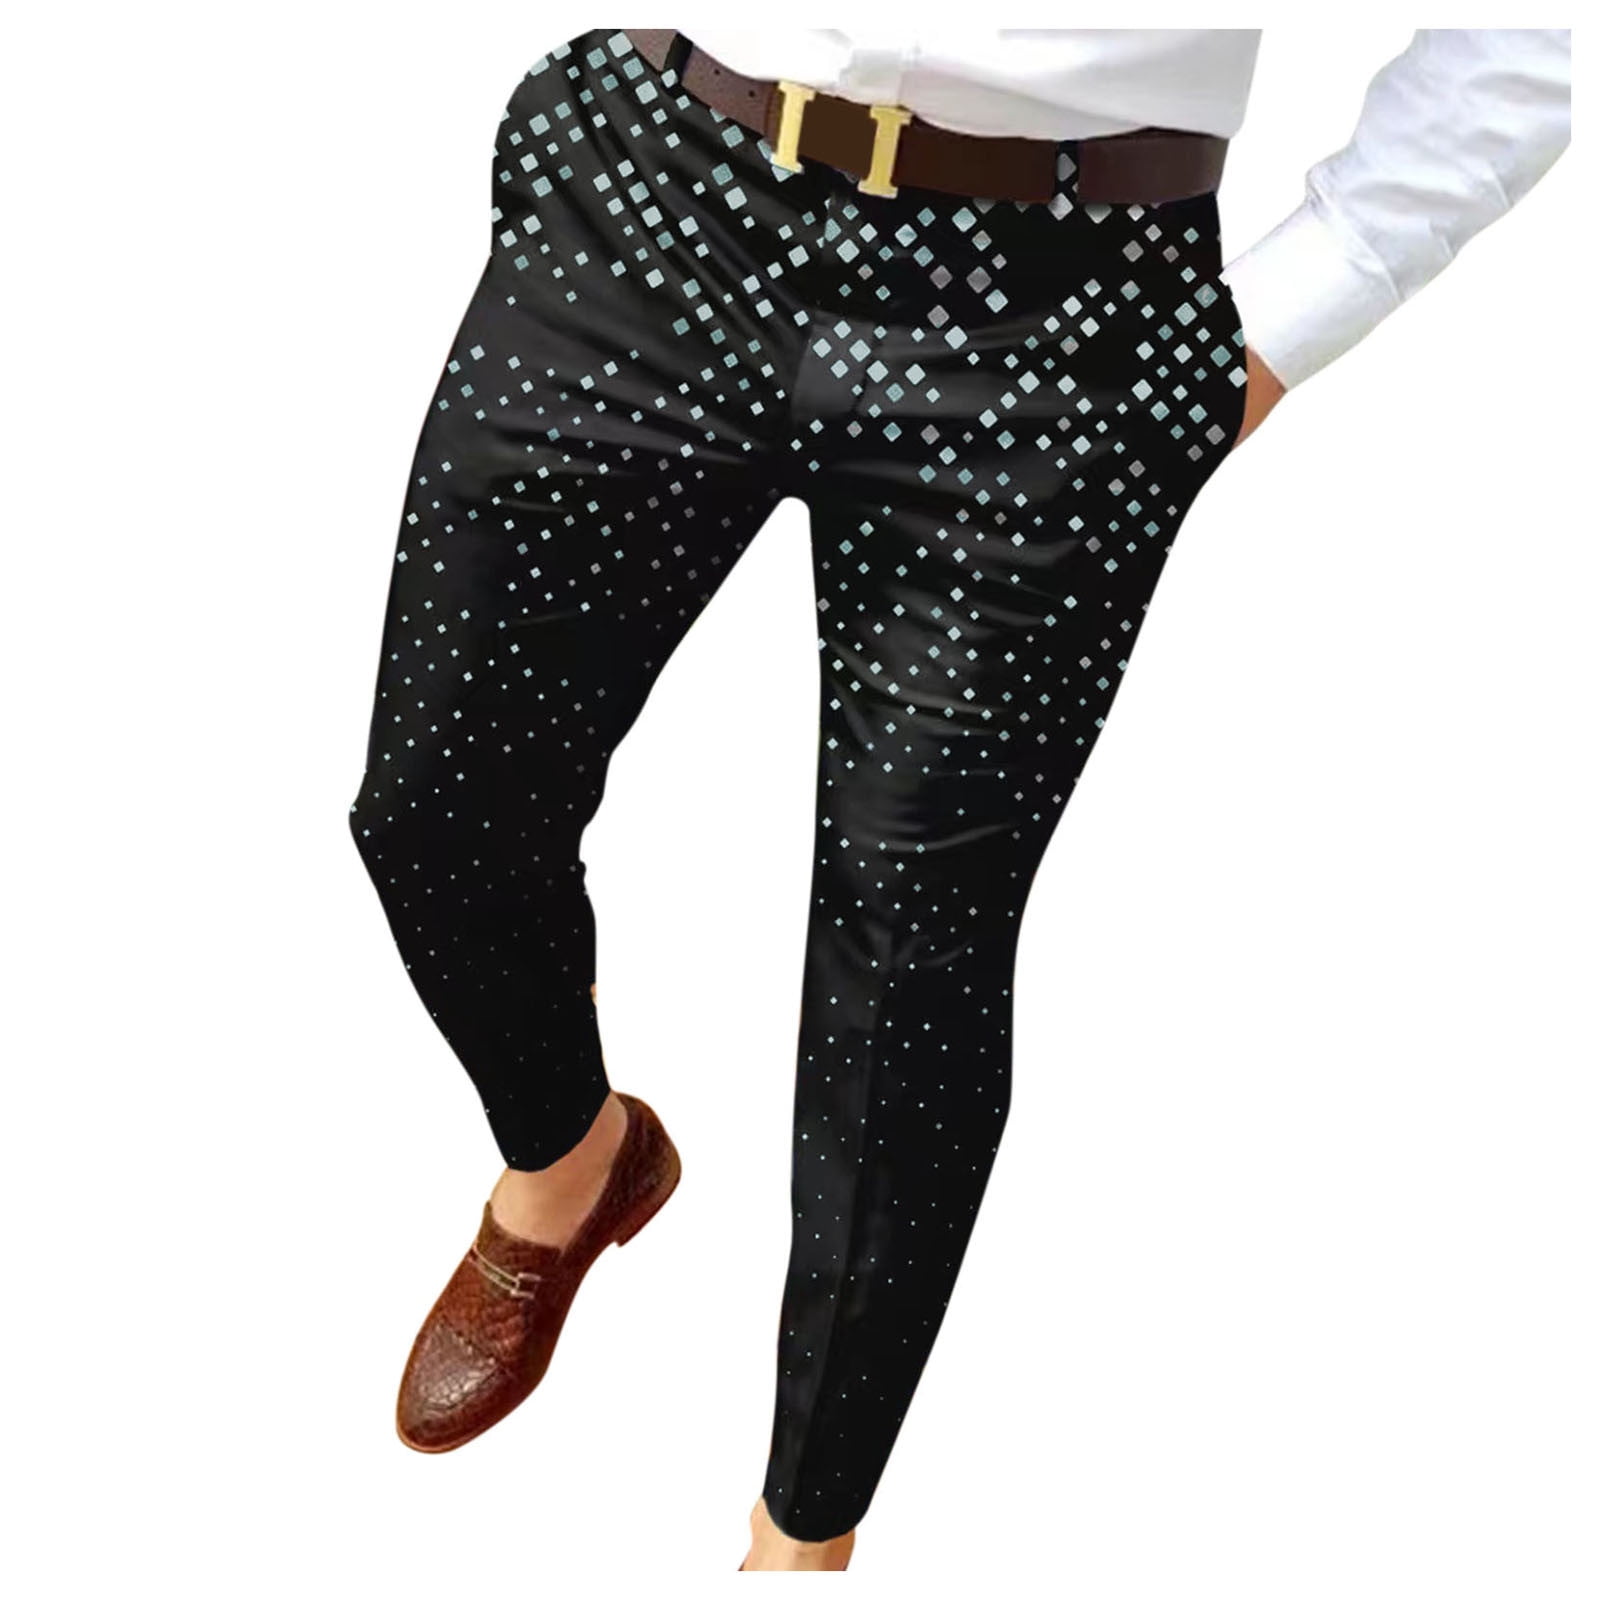 Party Wear Trousers - Party Wear Trousers buyers, suppliers, importers,  exporters and manufacturers - Latest price and trends